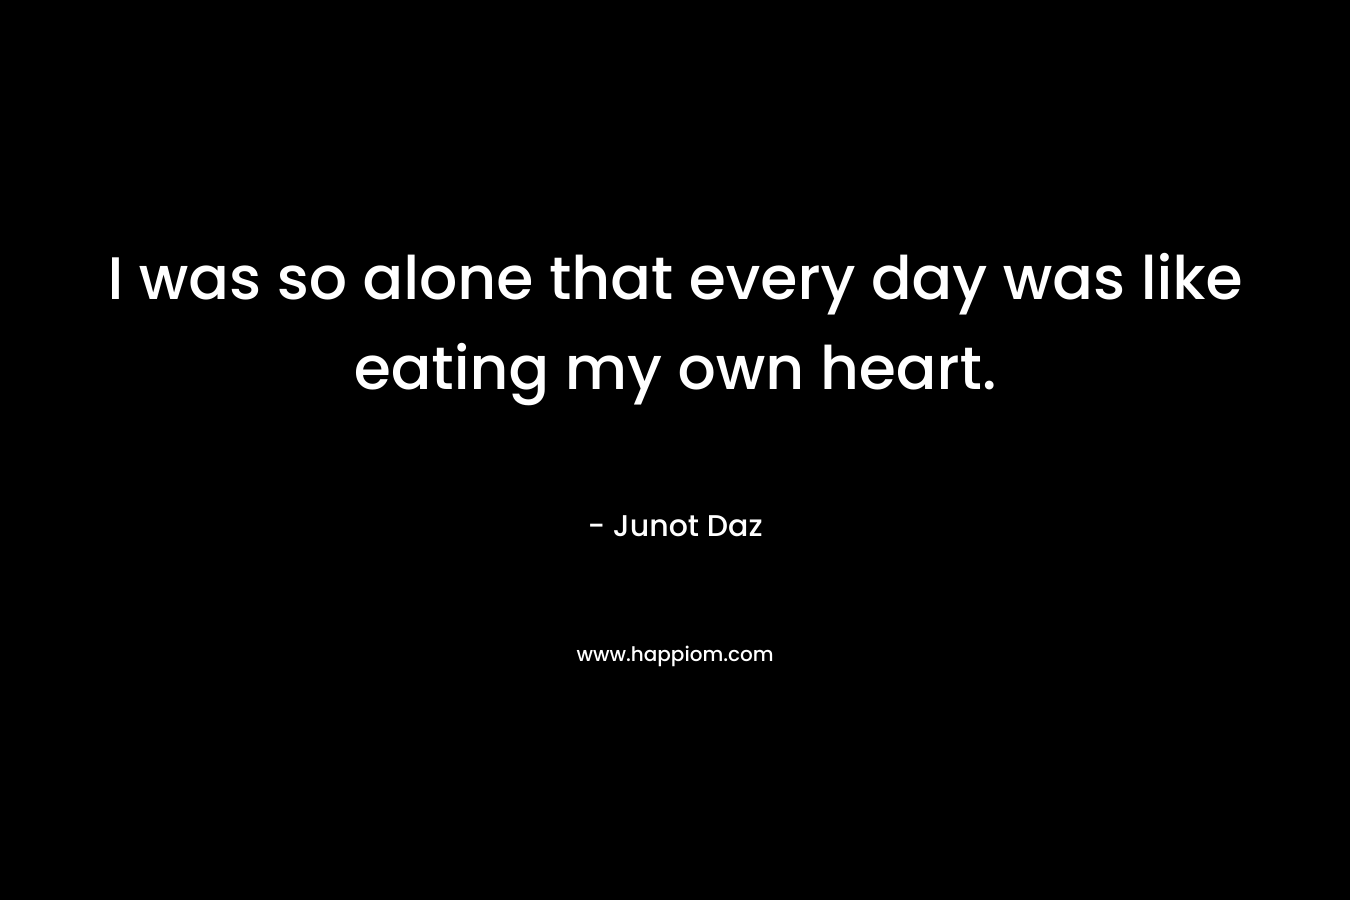 I was so alone that every day was like eating my own heart.